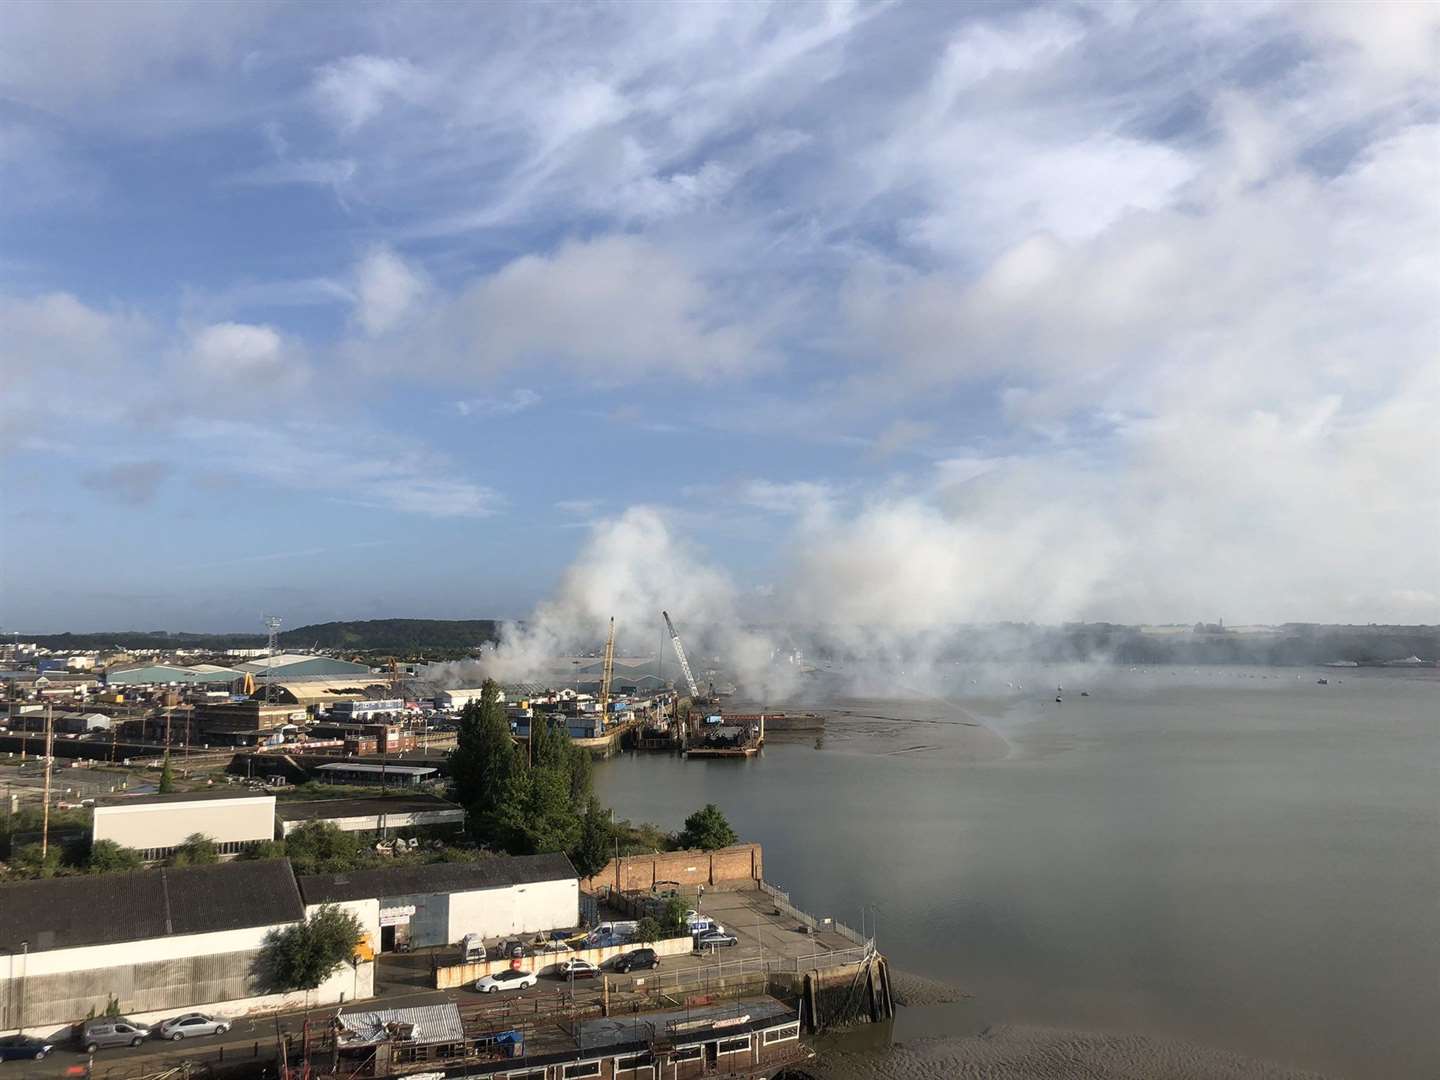 Smoke coming from the blaze at Chatham Docks could be seen from miles around. Picture: @GillsSteve